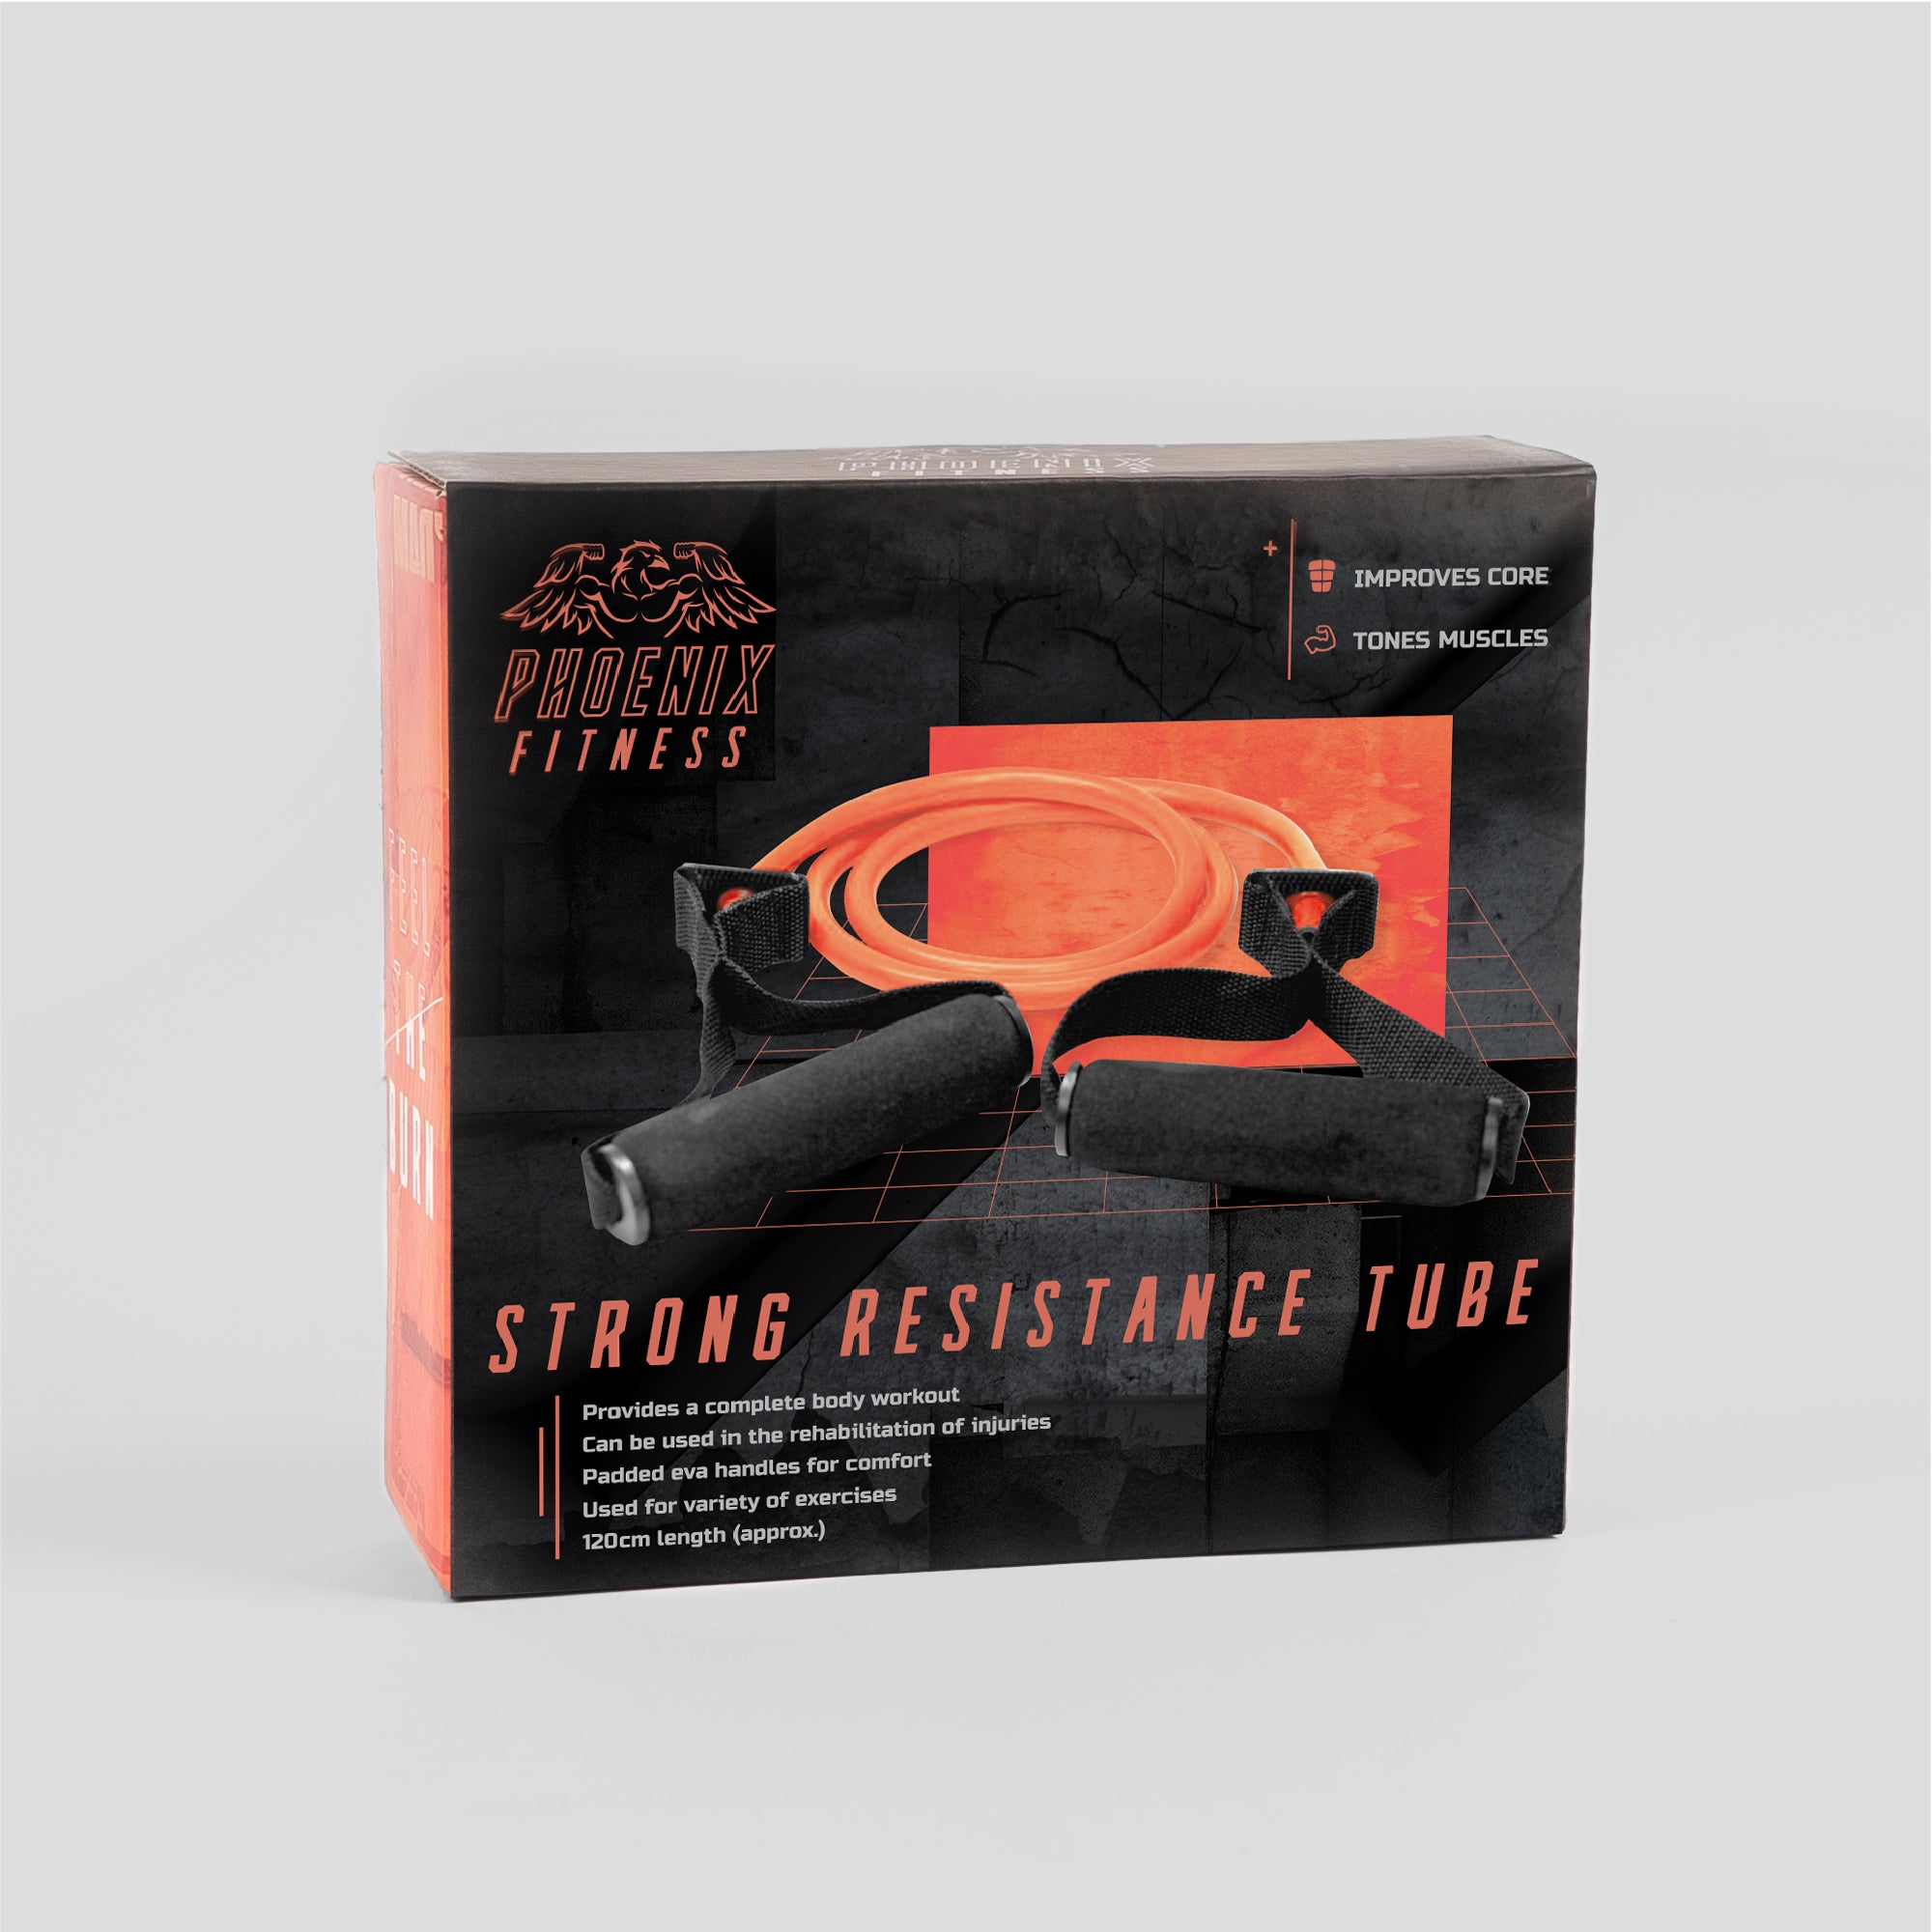 Resistance Tube - Strong